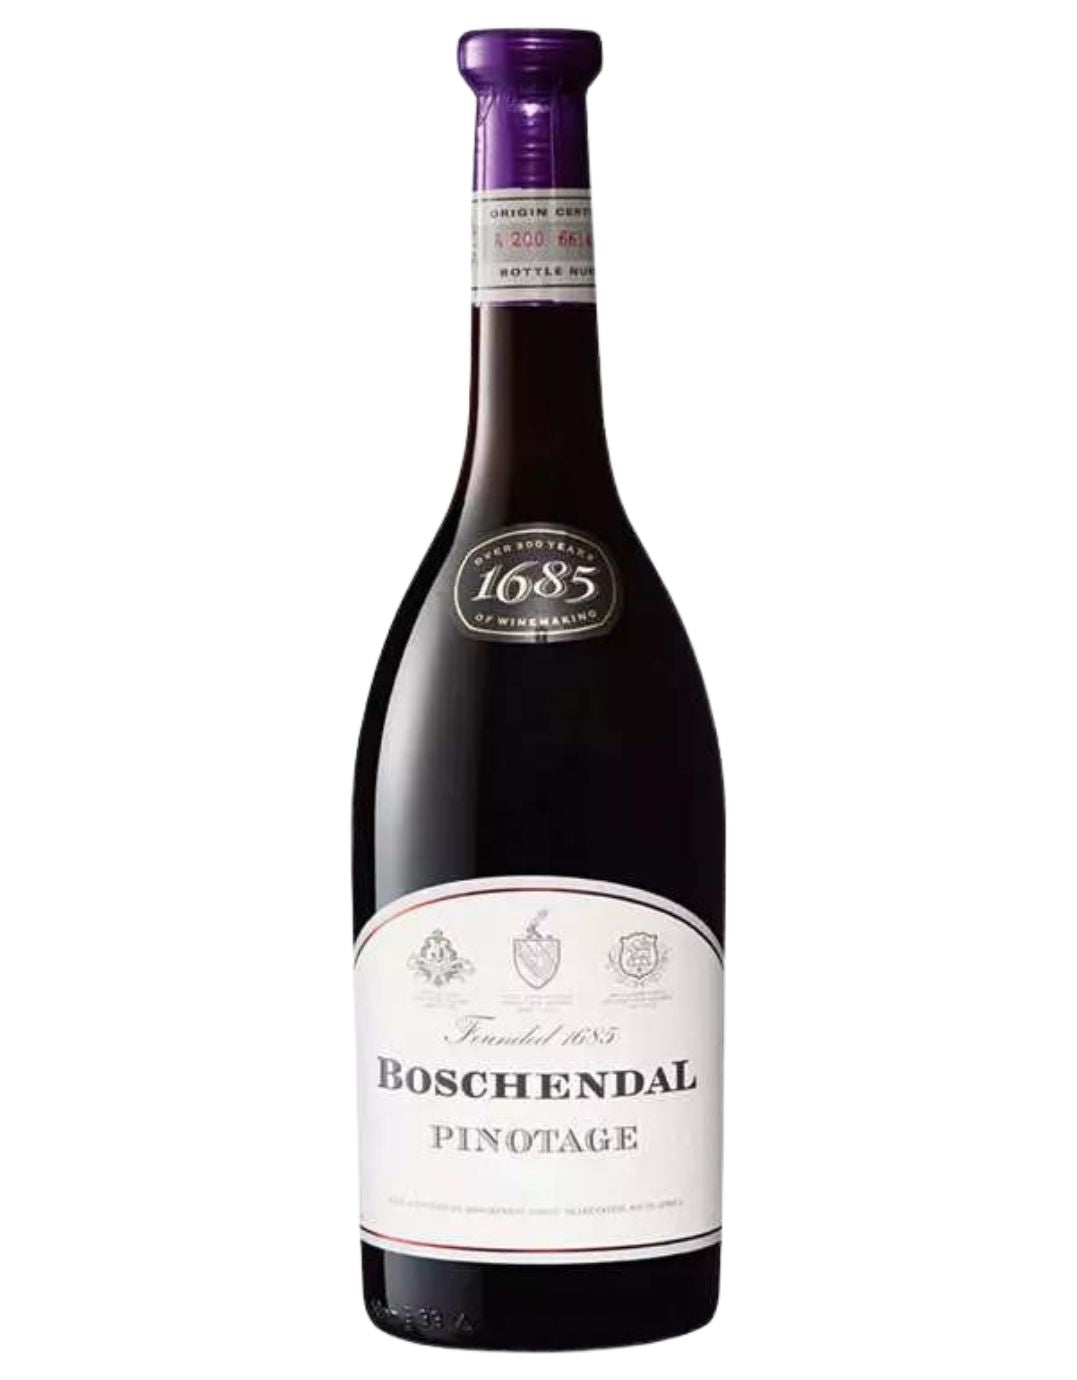 Buy Boschendal 1685 Pinotage now The online - 2019 WineStore